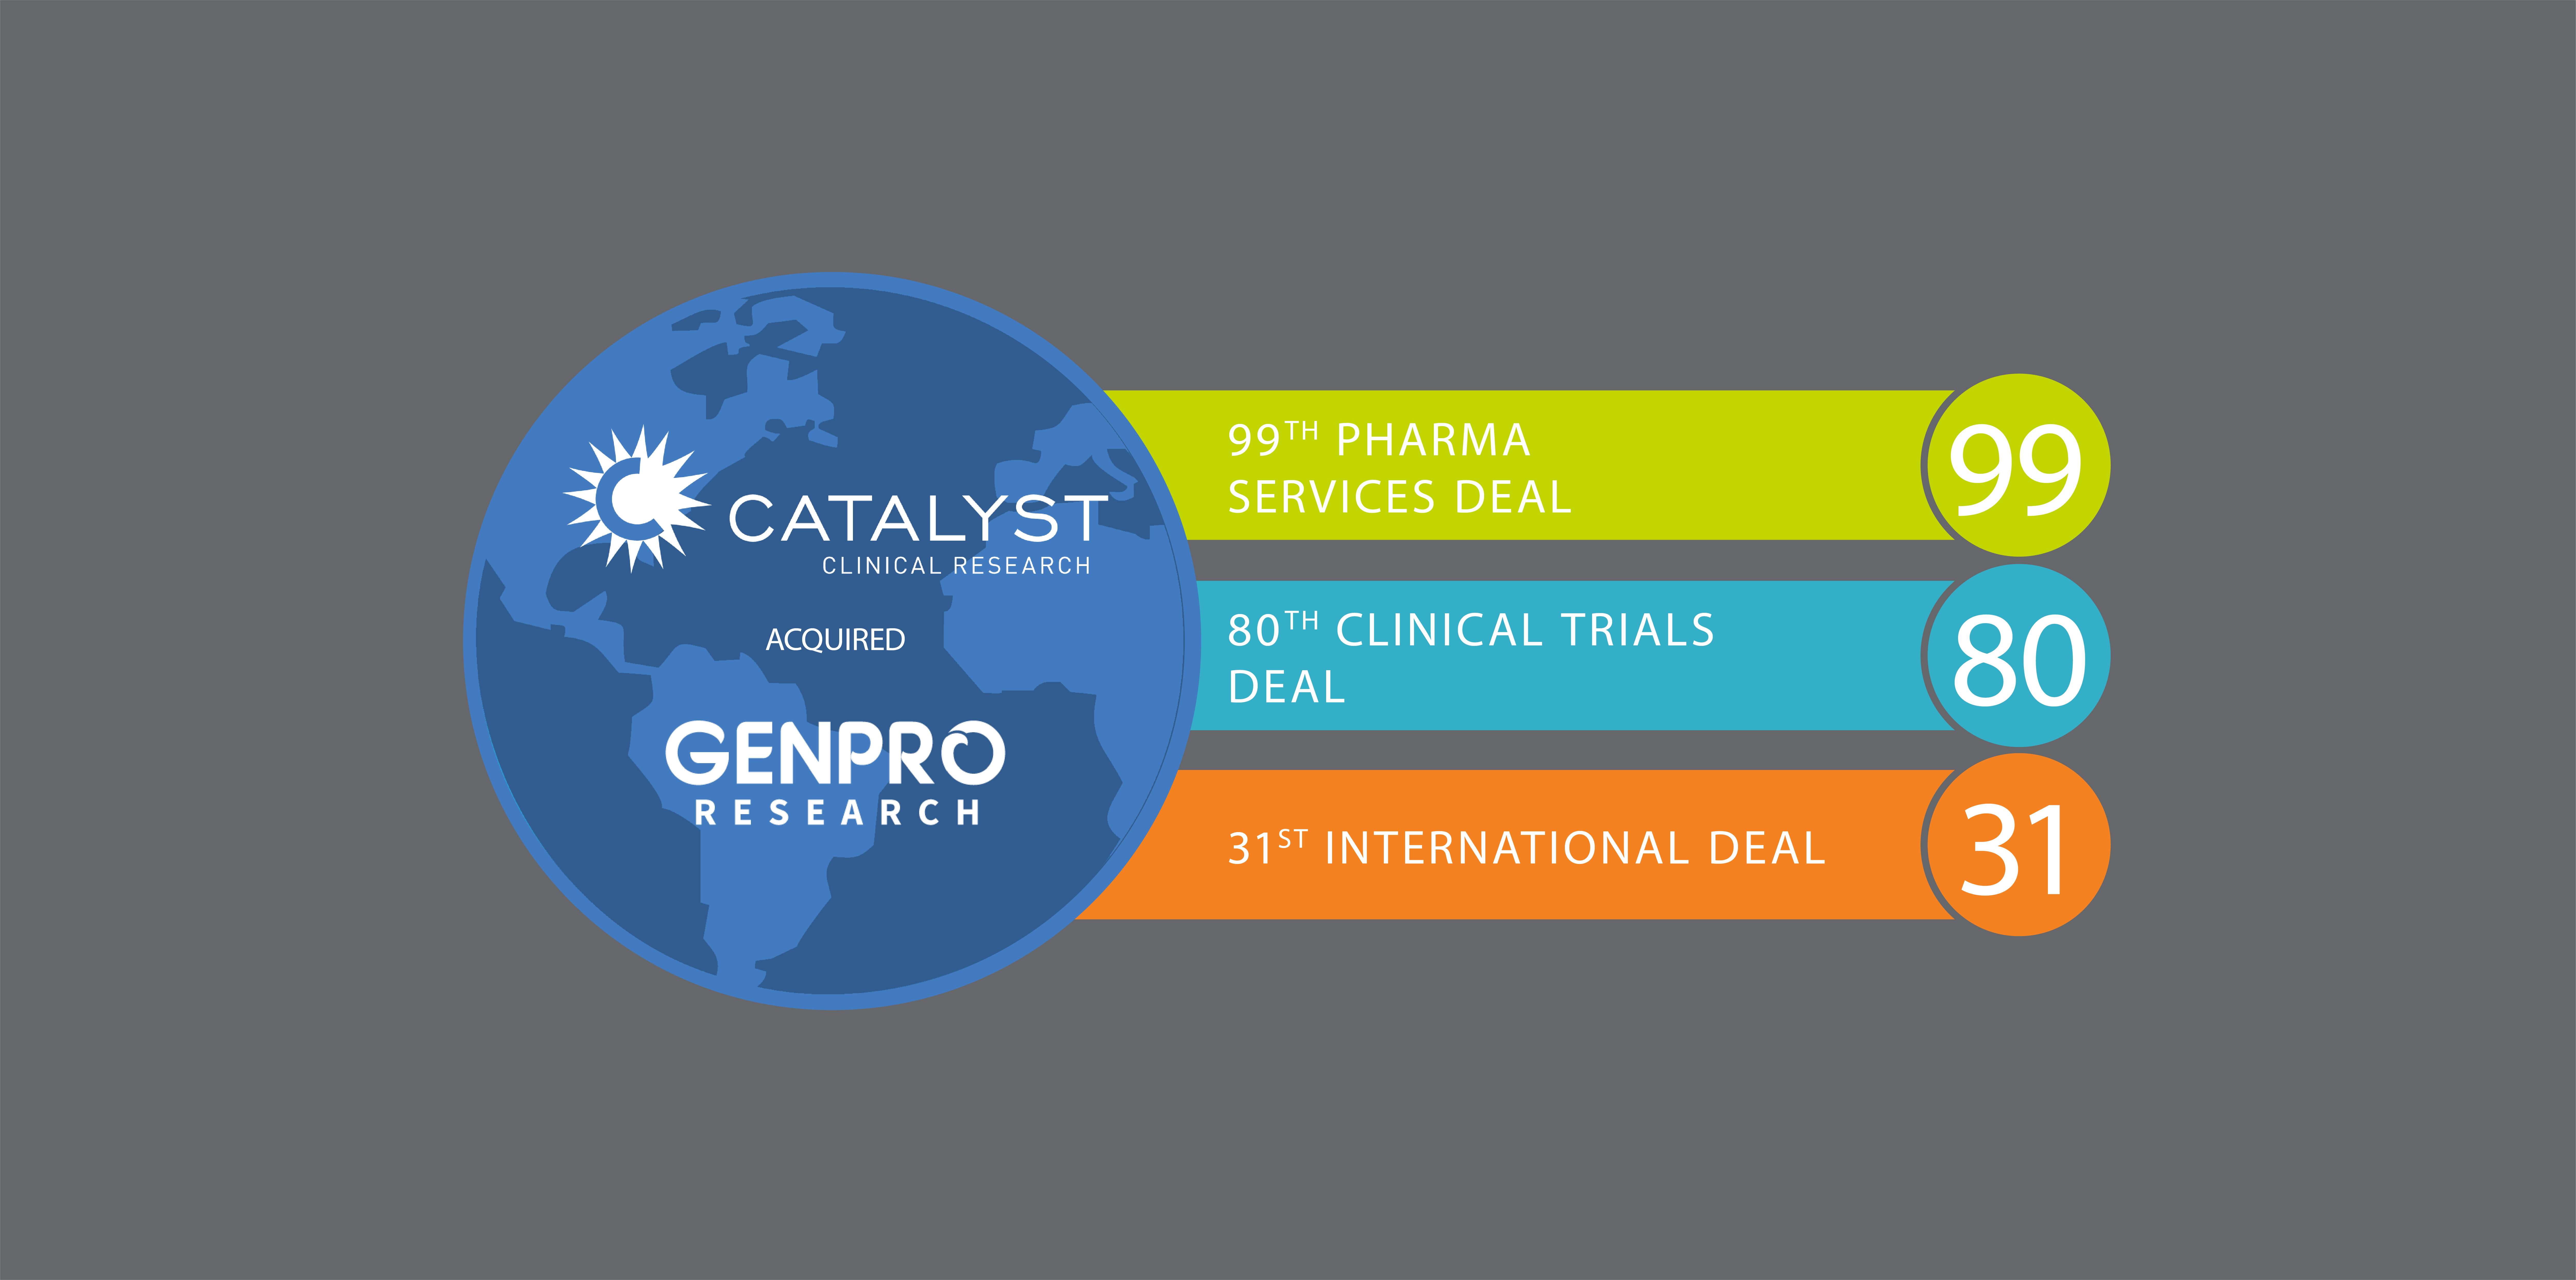 Catalyst Clinical Research, a Portfolio Company of QHP Capital, Acquired Genpro Research to Expand Global Footprint and Deepen Service Offerings